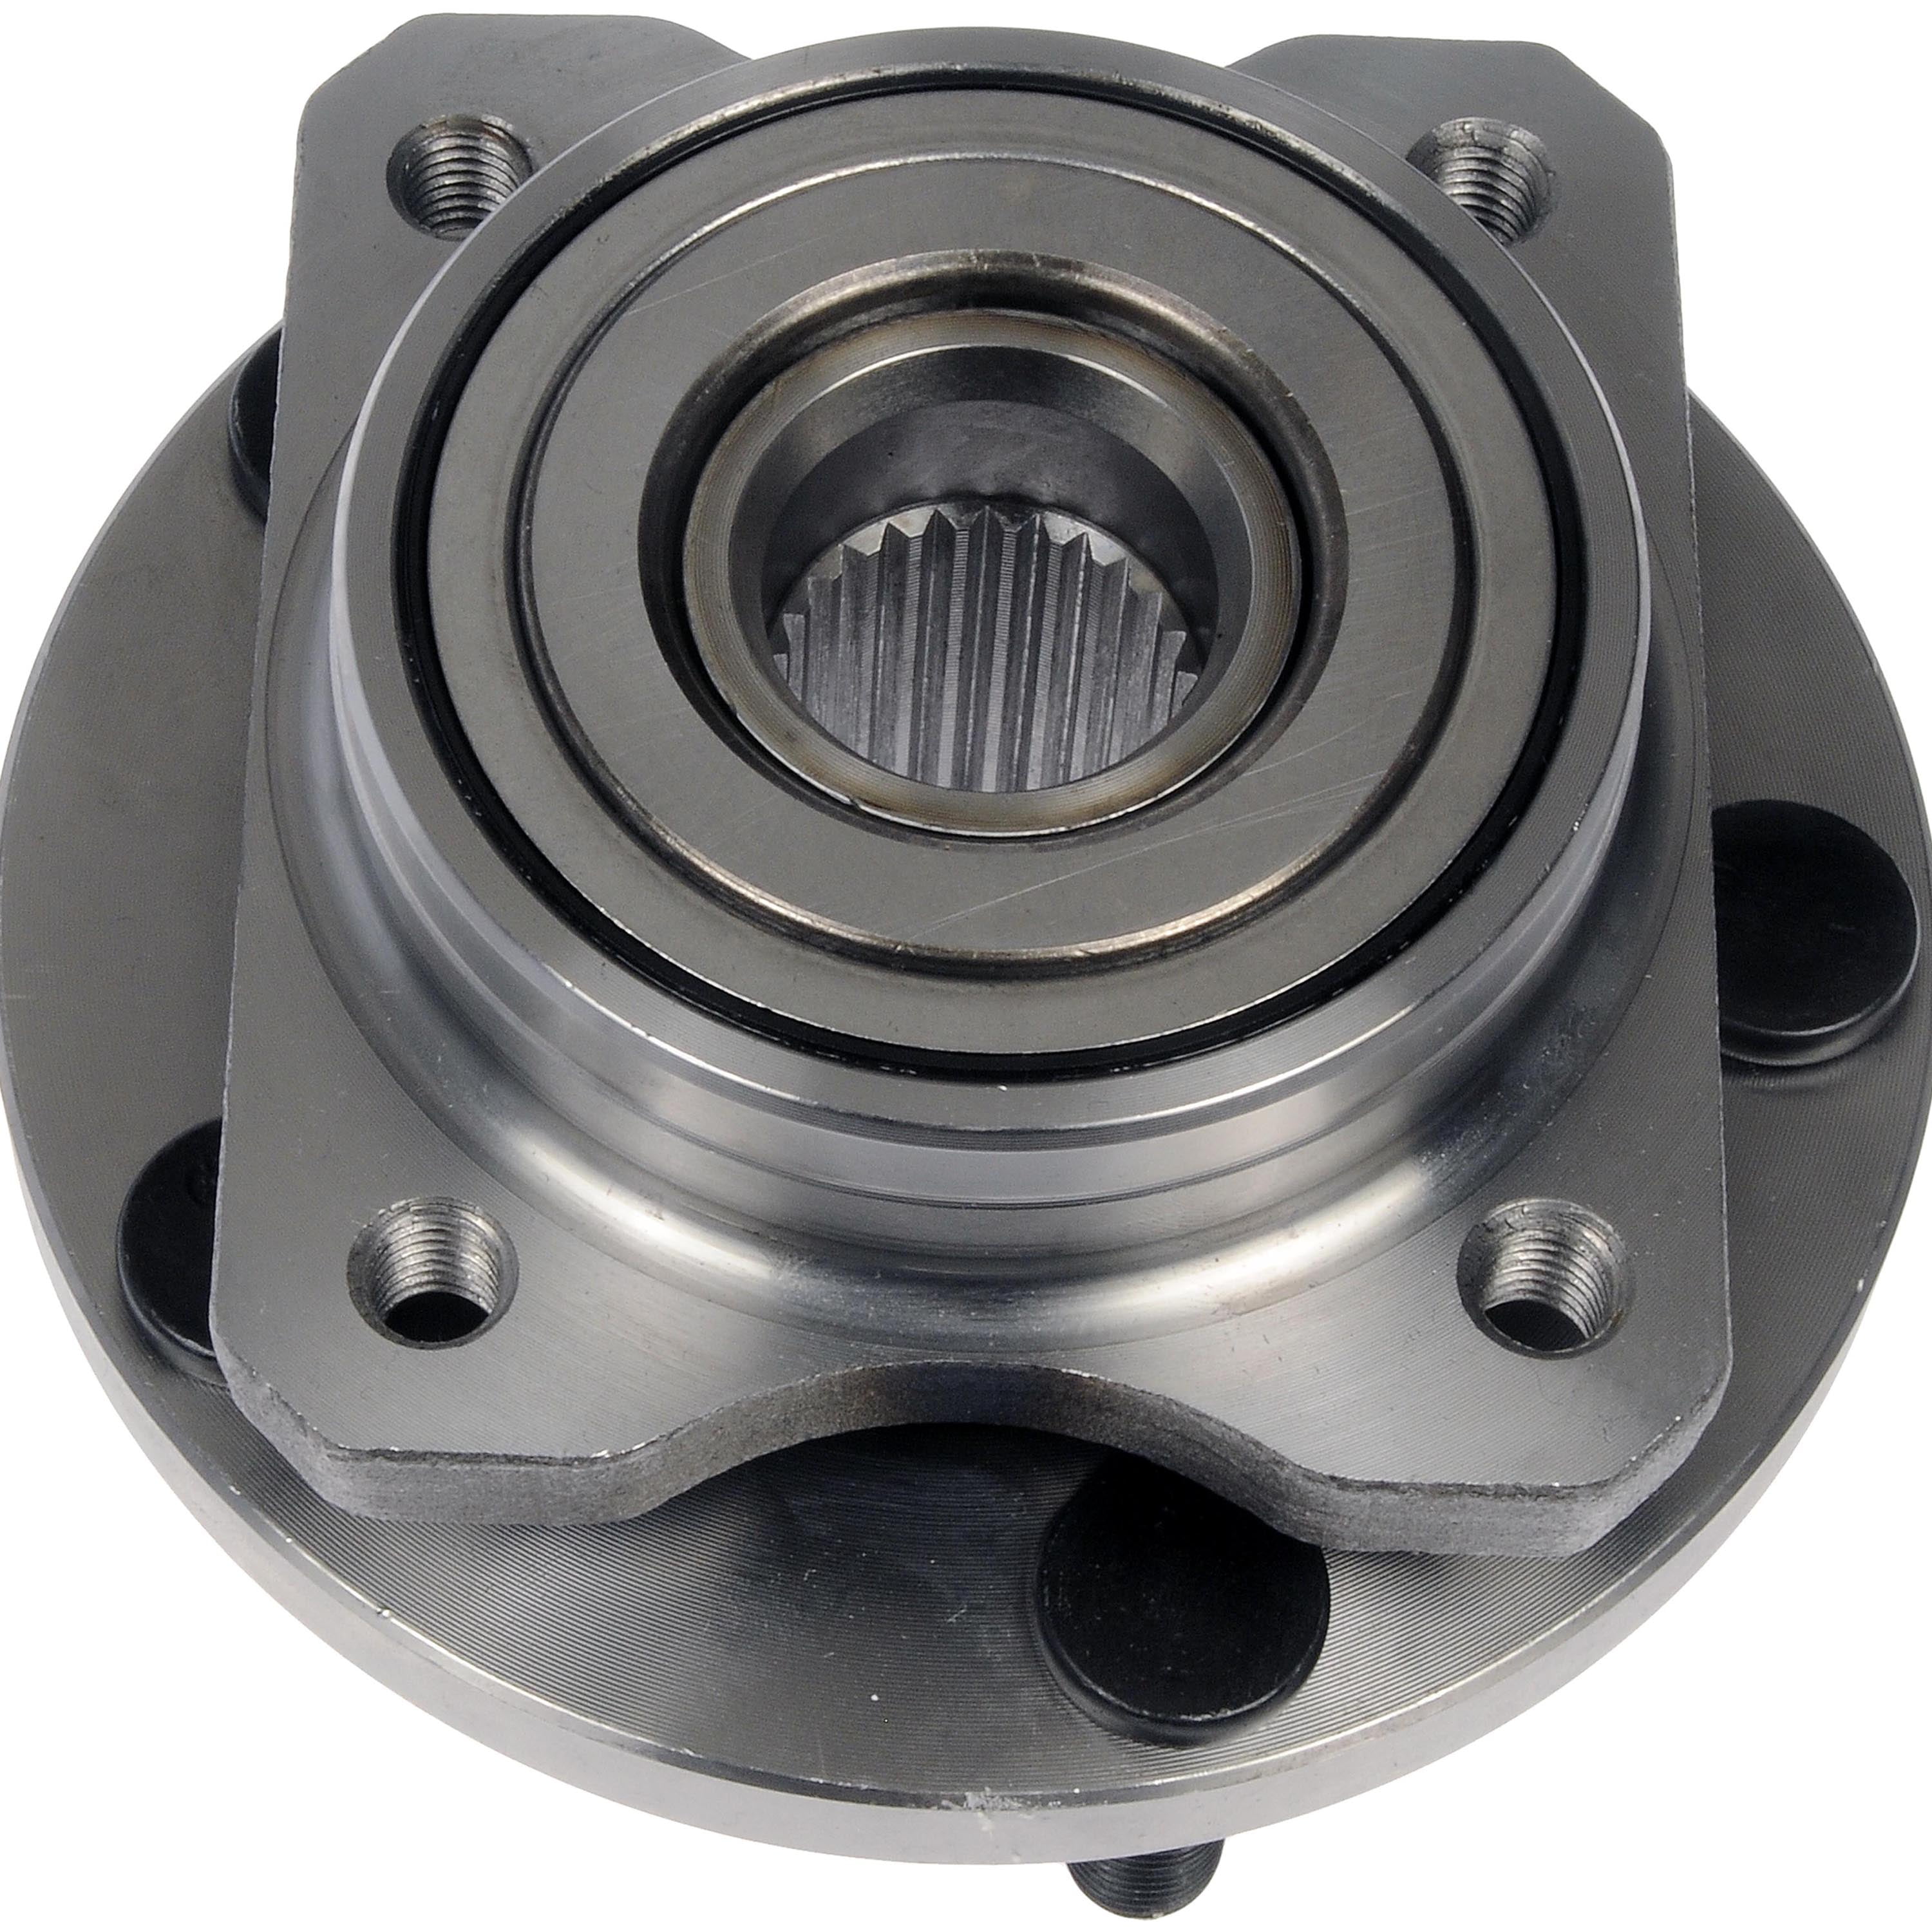 Dorman 951-867 Front Wheel Bearing and Hub Assembly for Select Chrysler/Dodge/Plymouth Models 